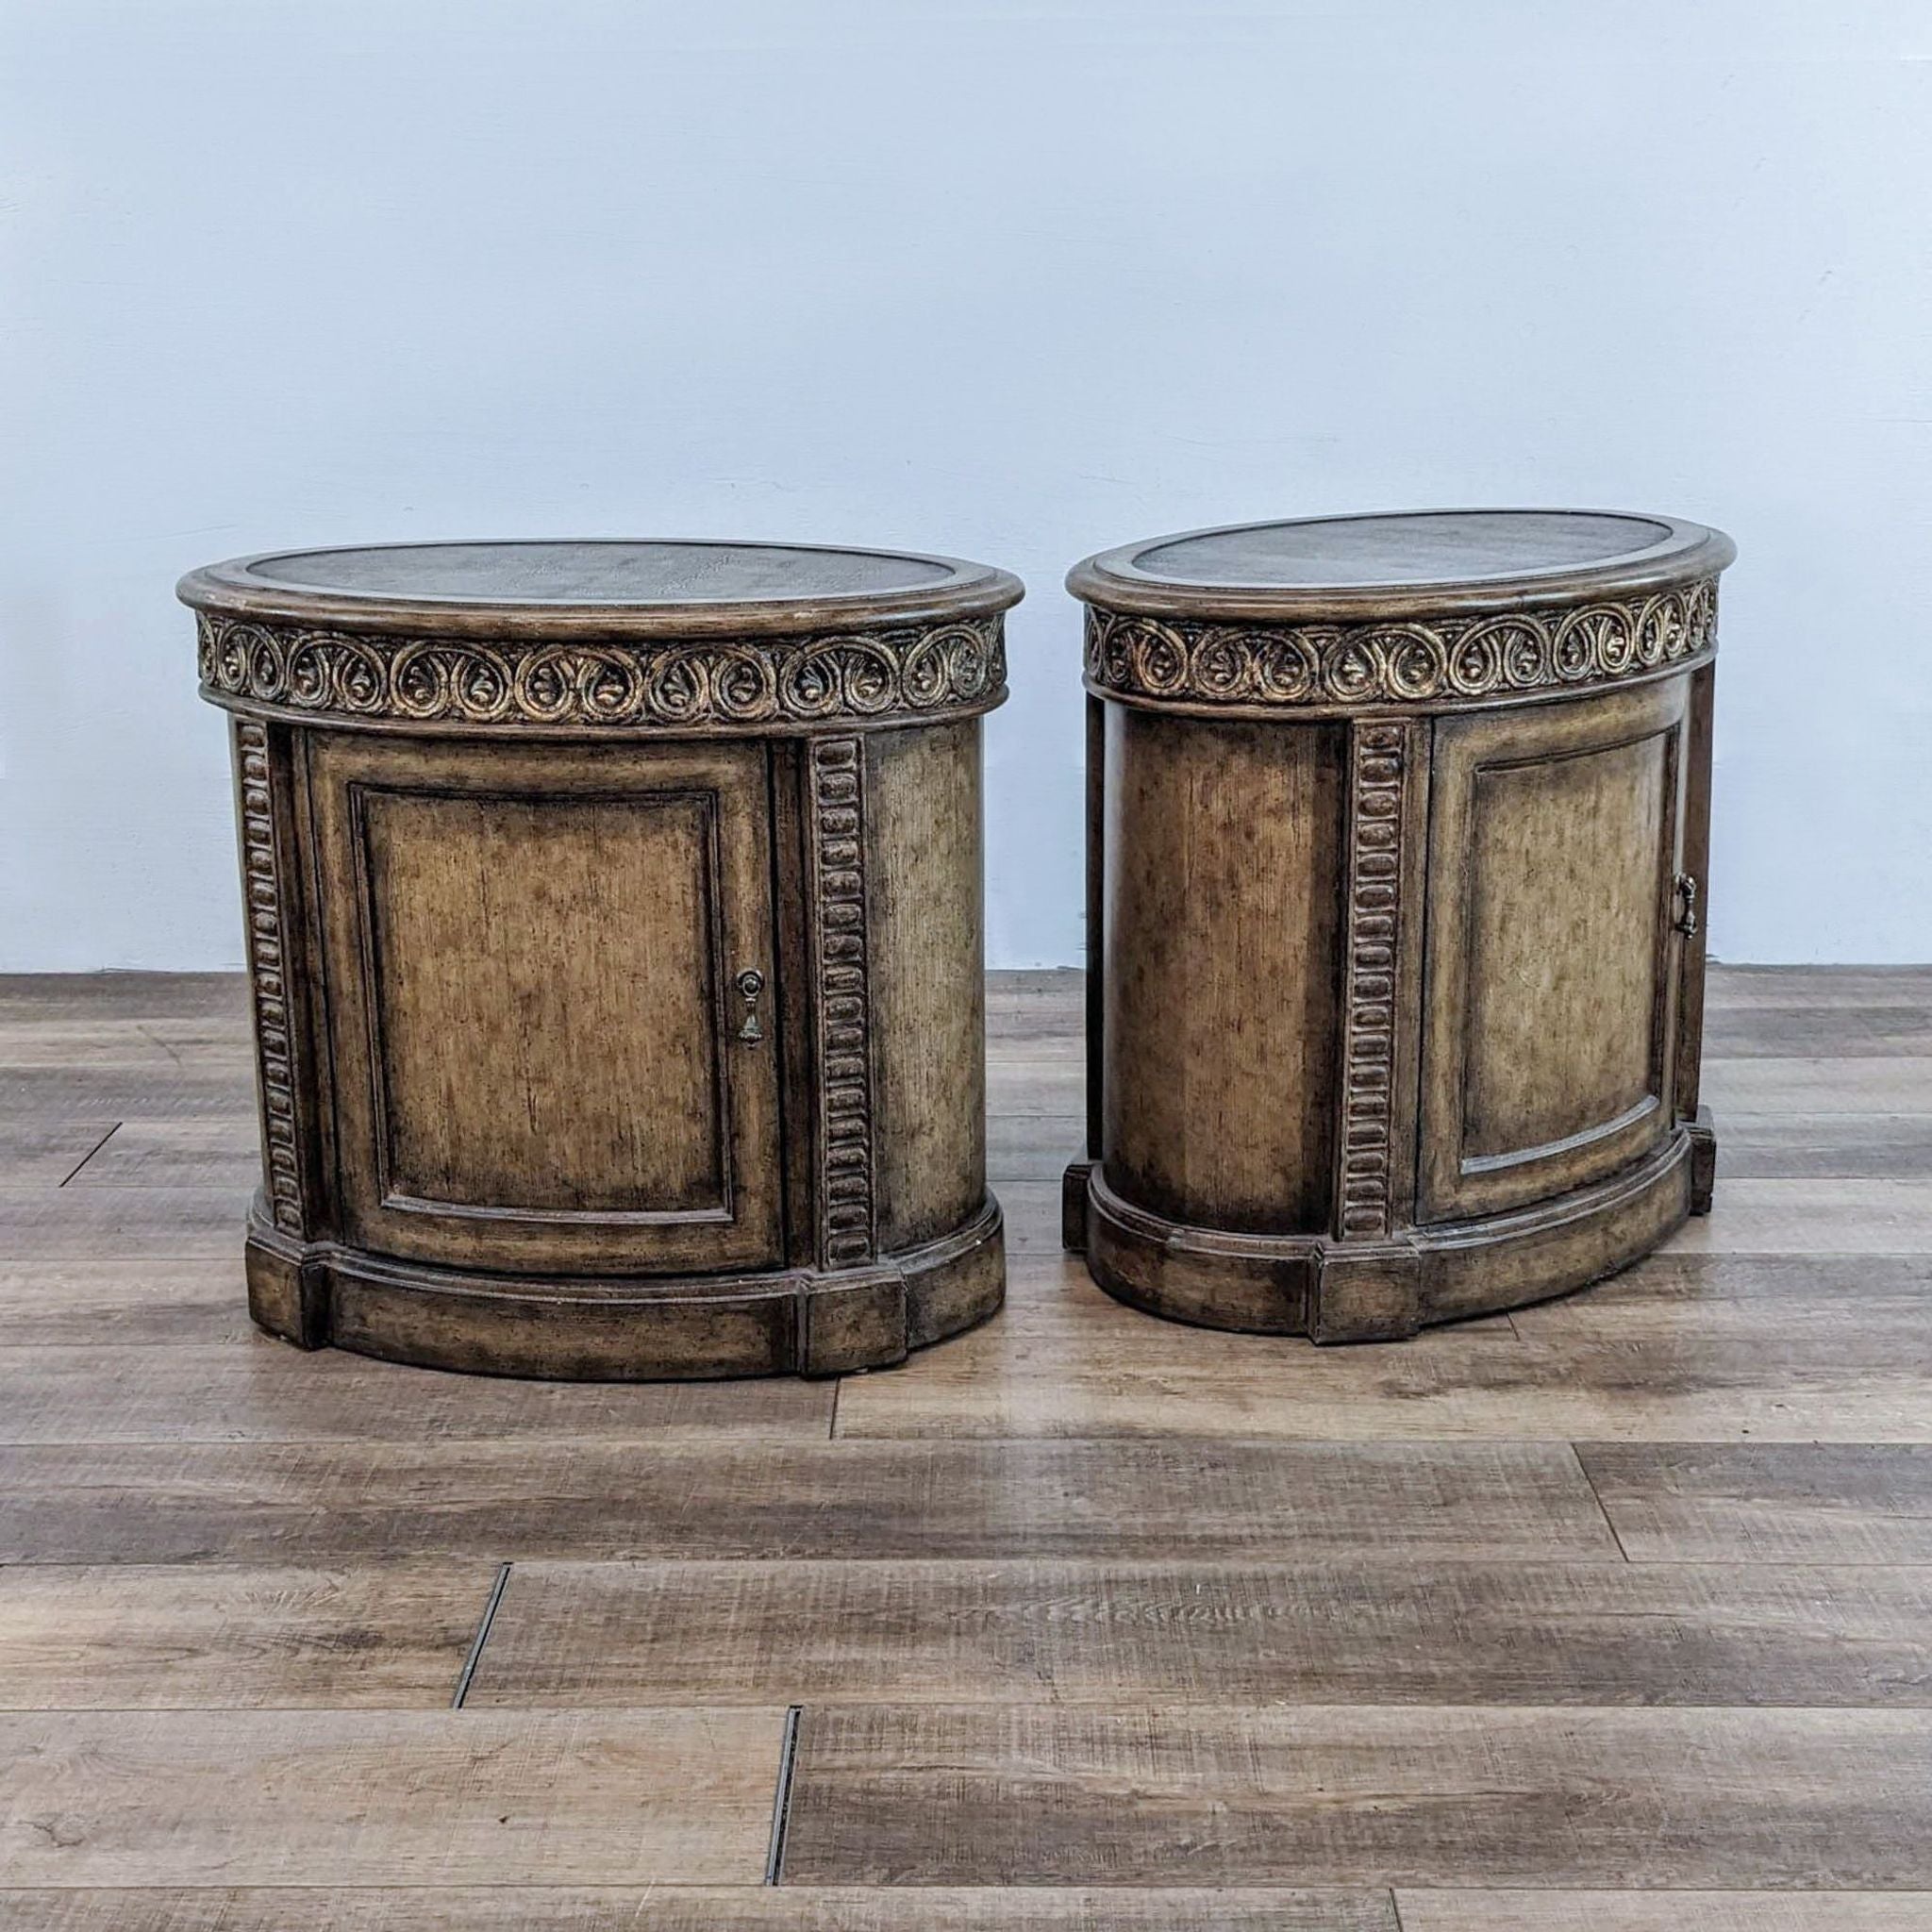 Antiqued, handcrafted end tables from The Platt Collection with a round top and ornate patterns.